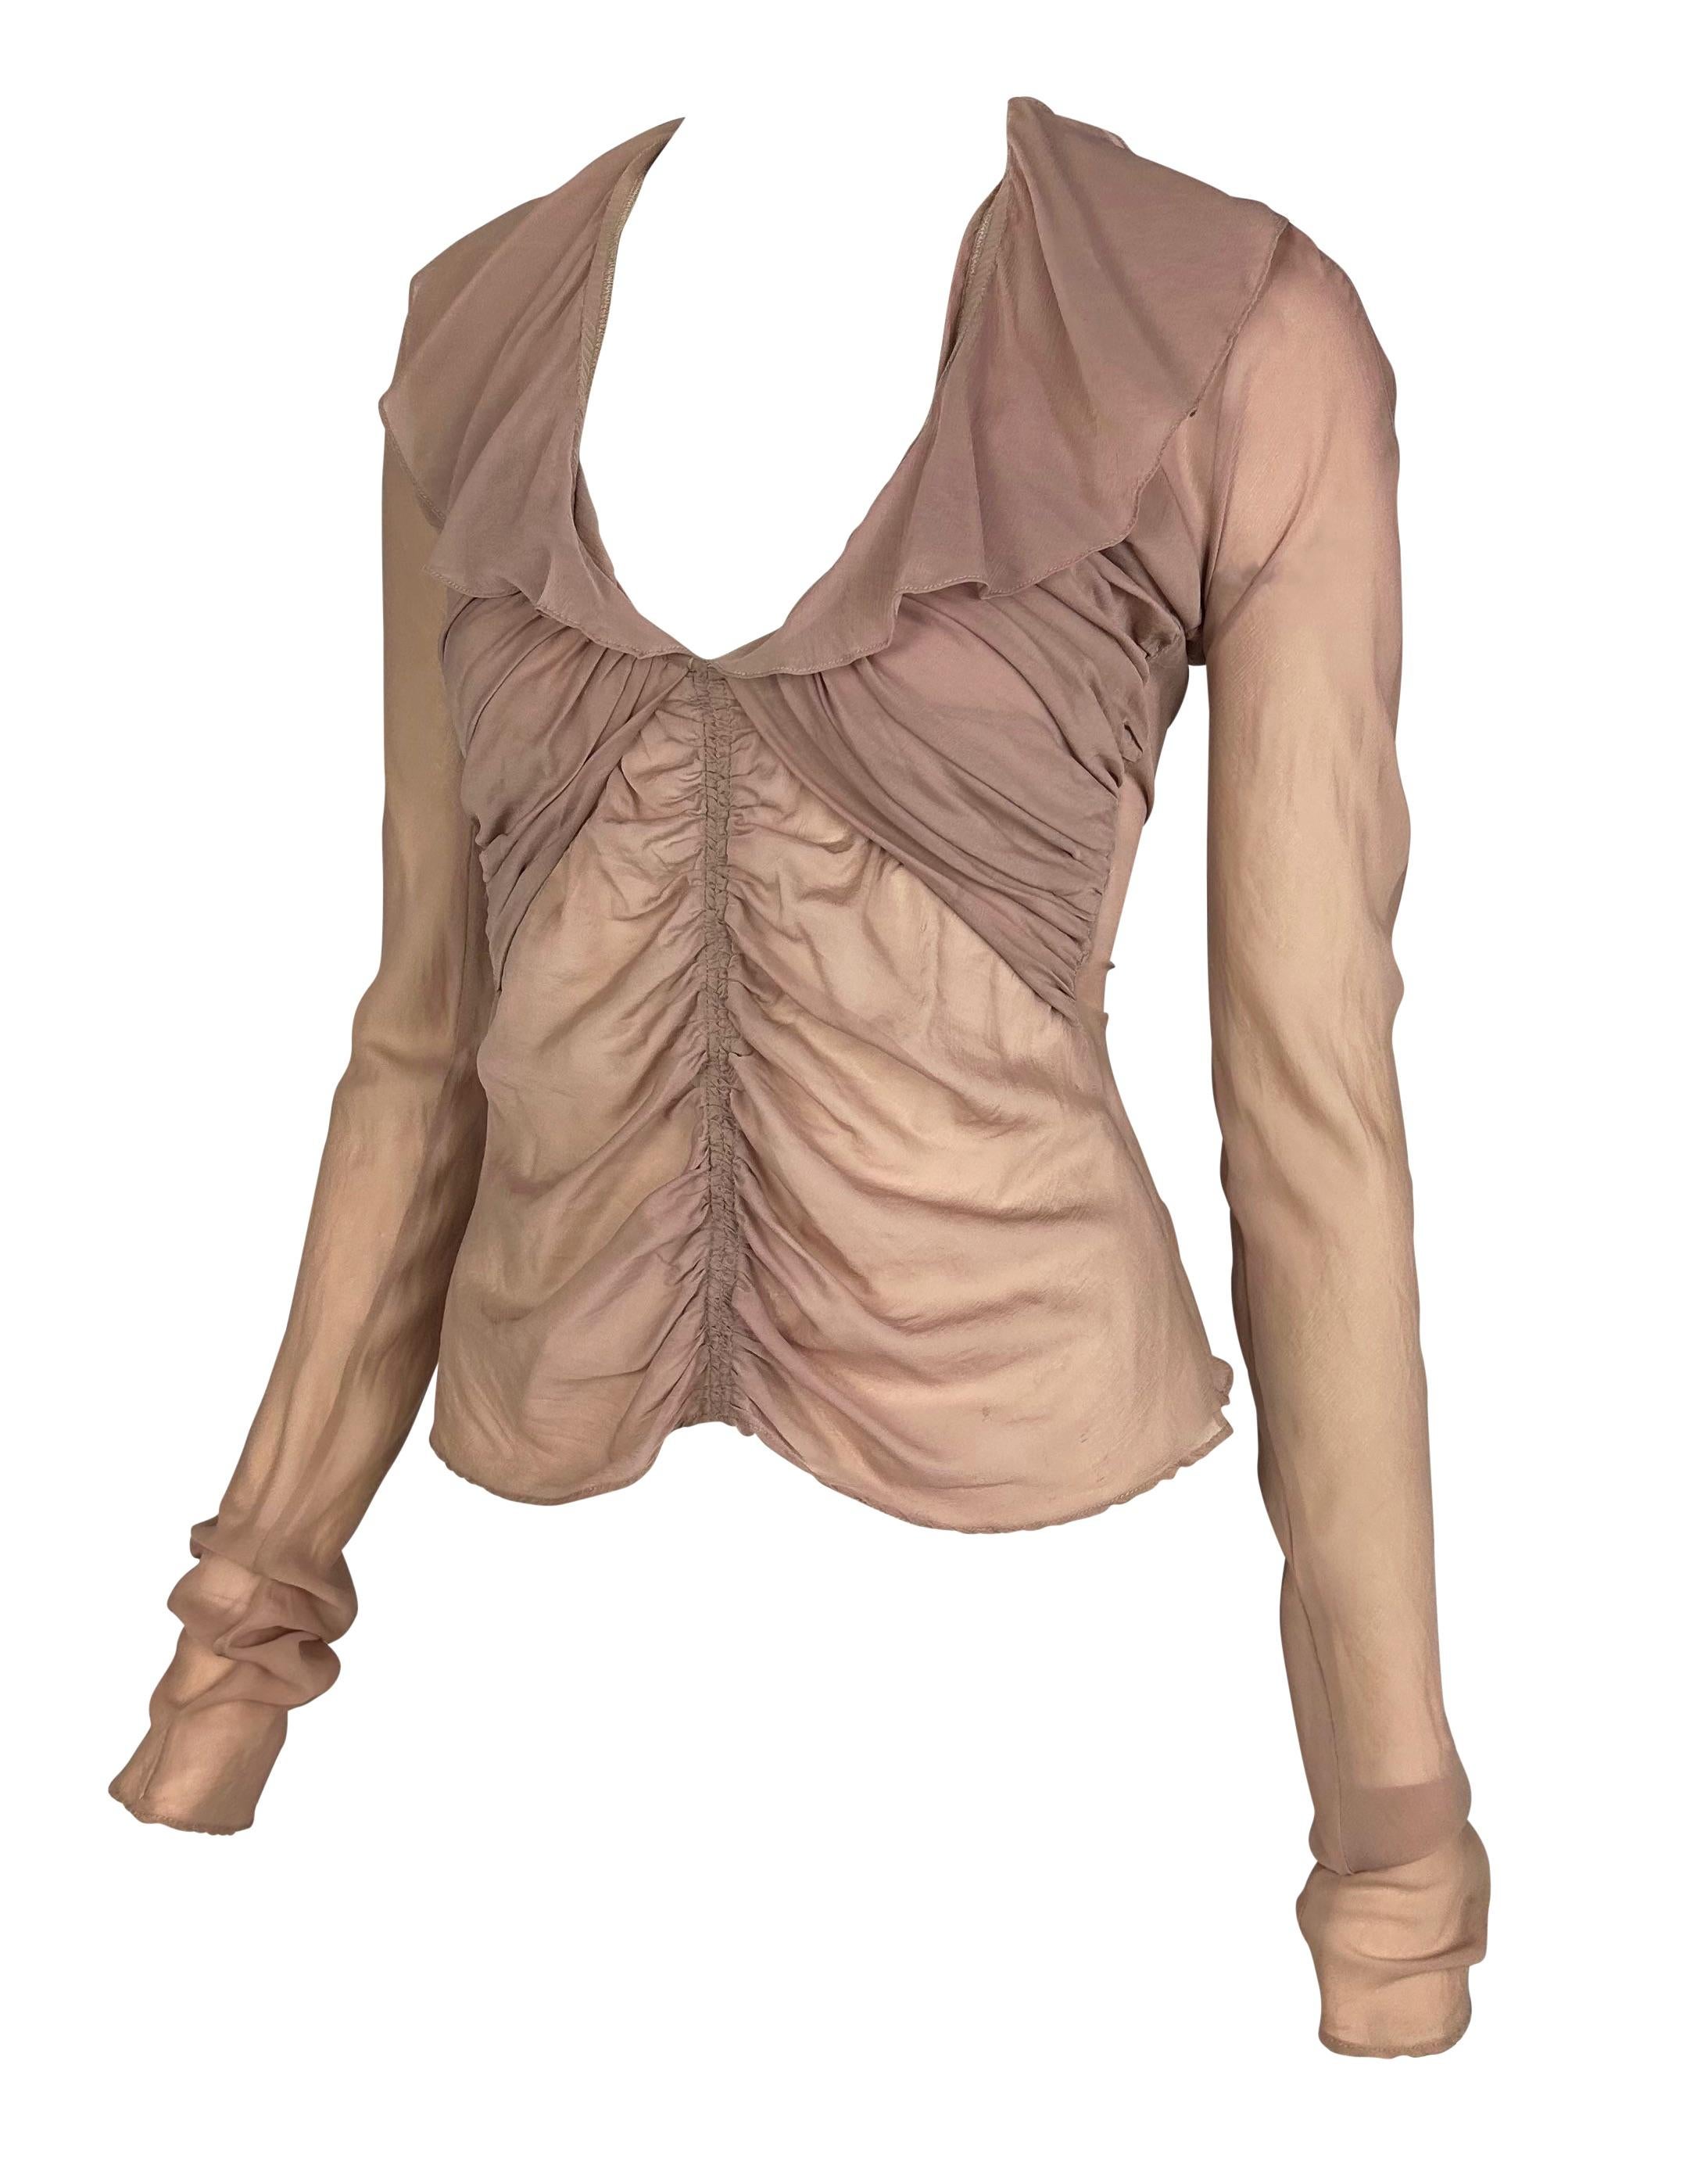 Presenting a beautiful blush chiffon Gucci long sleeve shirt, designed by Tom Ford. From the Spring/Summer 2003 collection, this fabulous top features ruching throughout, ruffles around the deep rounded neckline, and is made complete with cut out at